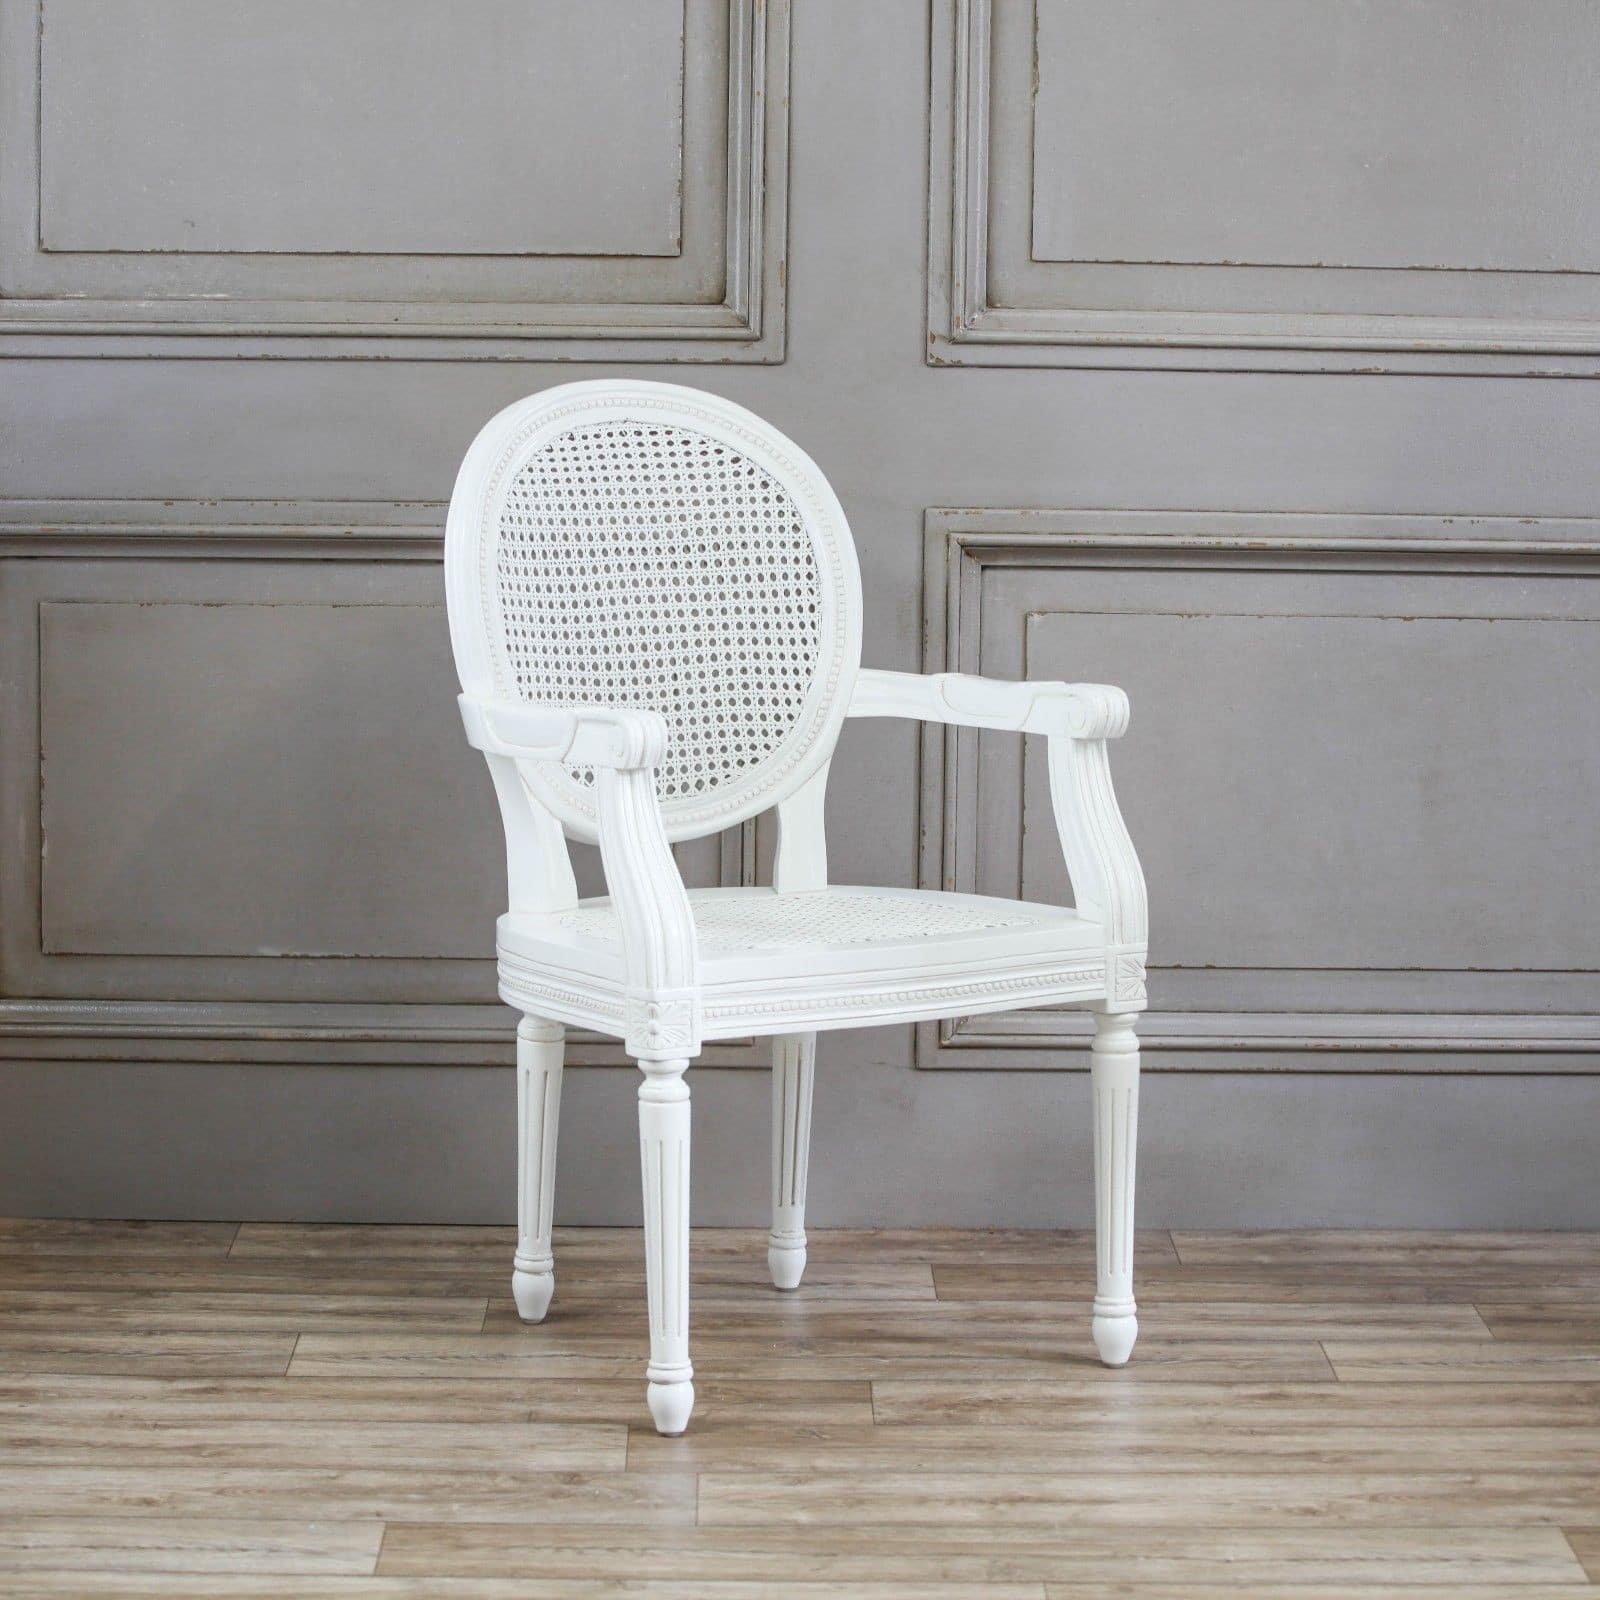 French Chateau White Rattan Dining / Bedroom Arm Chair Furniture La Maison Chic Luxury Interiors